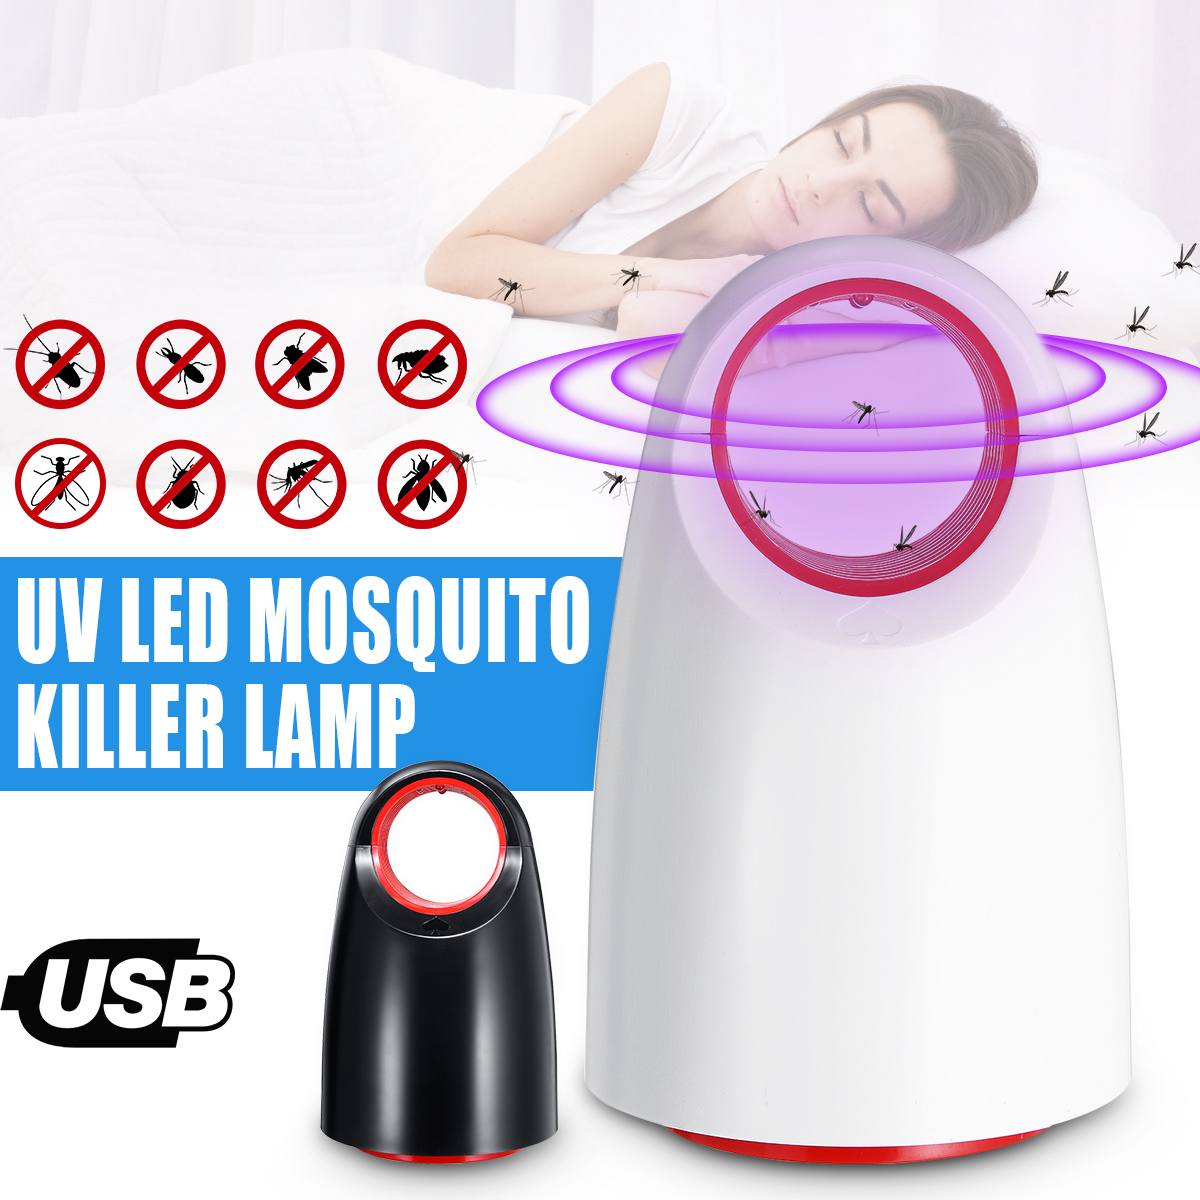 5W-USB-Mosquito-Dispeller-Insect-Killer-Lamp-Fly-Bug-Zapper-Trap-Pest-LED-Control-UV-Light-1443090-1